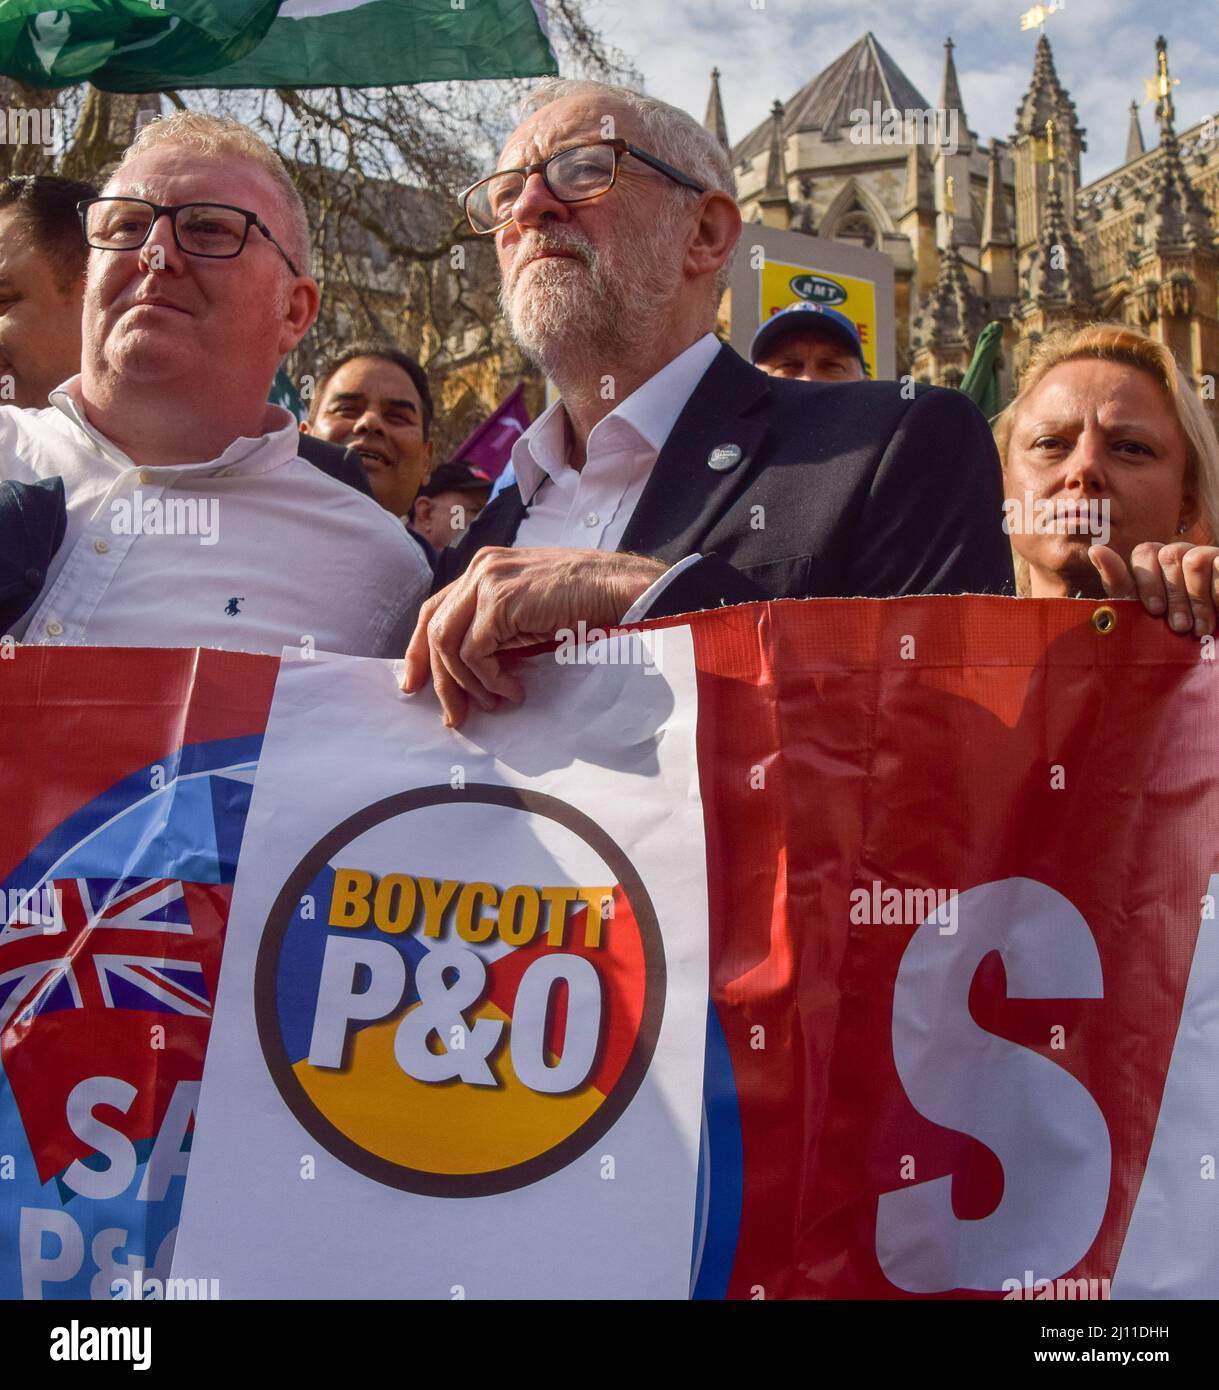 London, UK. 21st March 2022. Labour MP Jeremy Corbyn joins the protesters outside Parliament. P&O Ferries staff and RMT Union members marched from the headquarters of DP World, the company which owns P&O, to Parliament, after 800 UK staff were fired and replaced by agency workers. Credit: Vuk Valcic/Alamy Live News Stock Photo